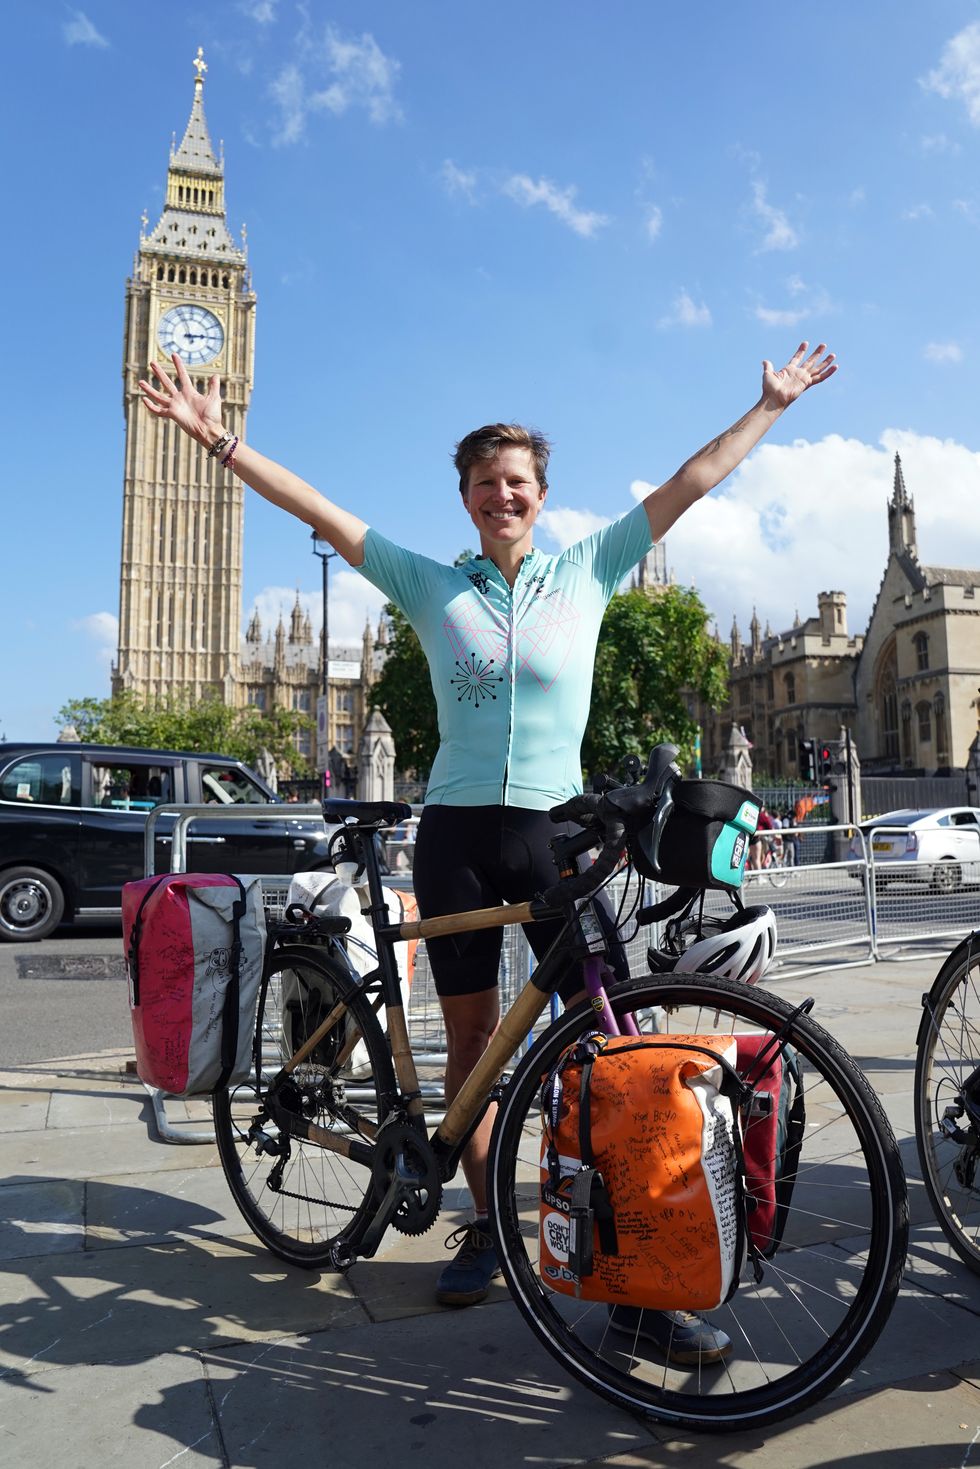 Cyclist reaches Parliament Square after 3,000-mile ride around Britain